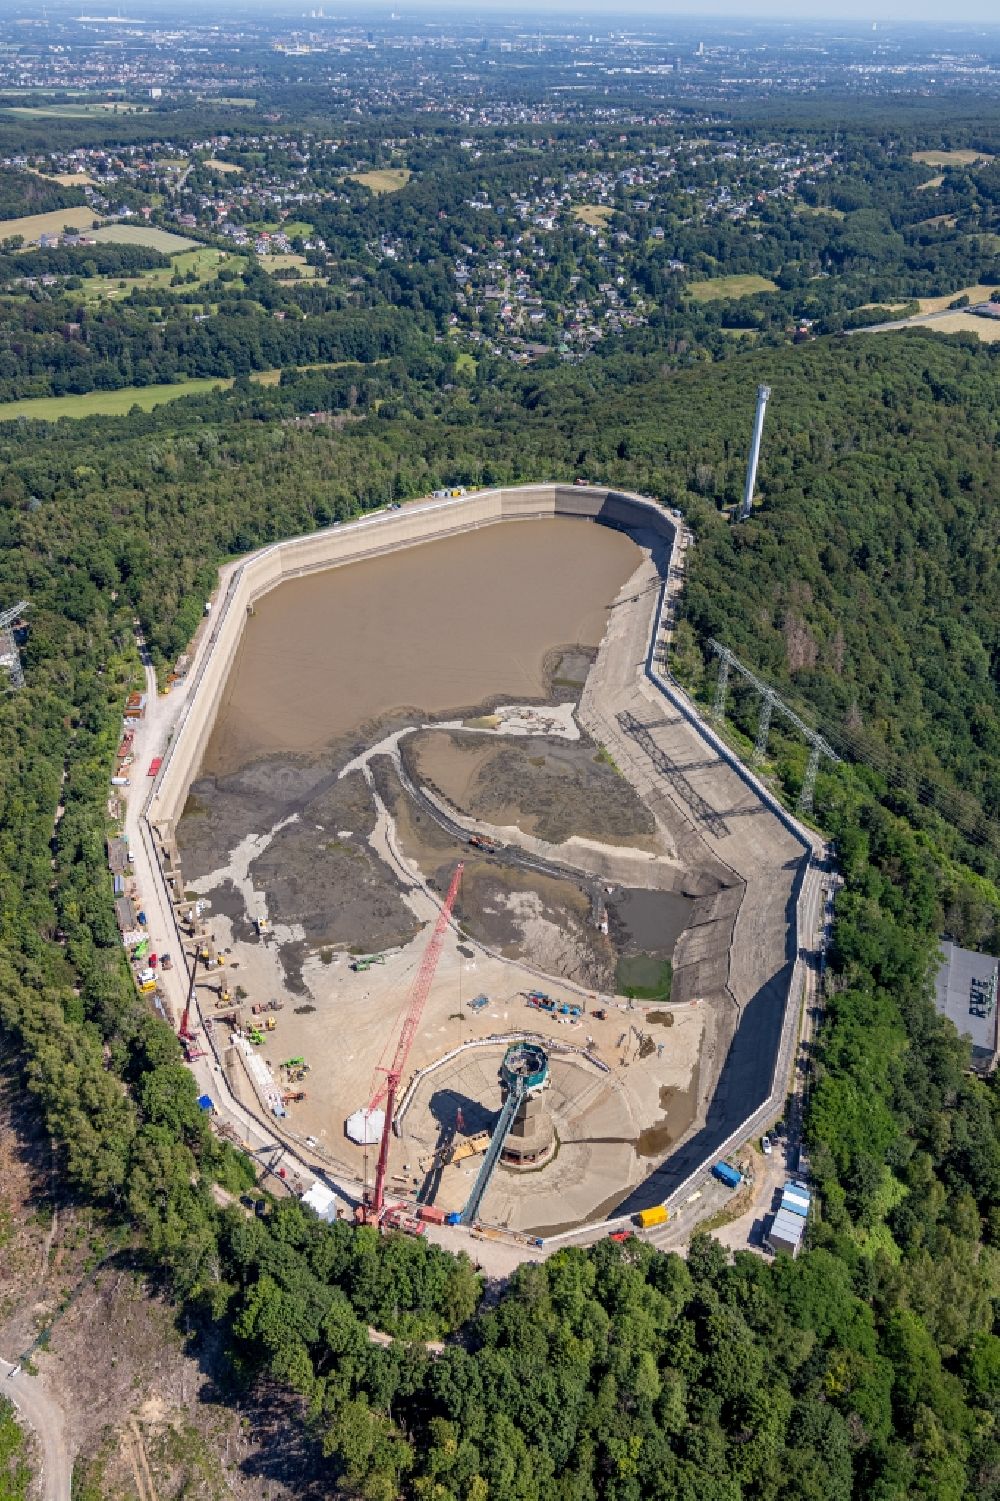 Herdecke from above - Construction site of Pumped storage power plant / hydro power plant with energy storage on Hengsteysee in Herdecke in North Rhine-Westphalia